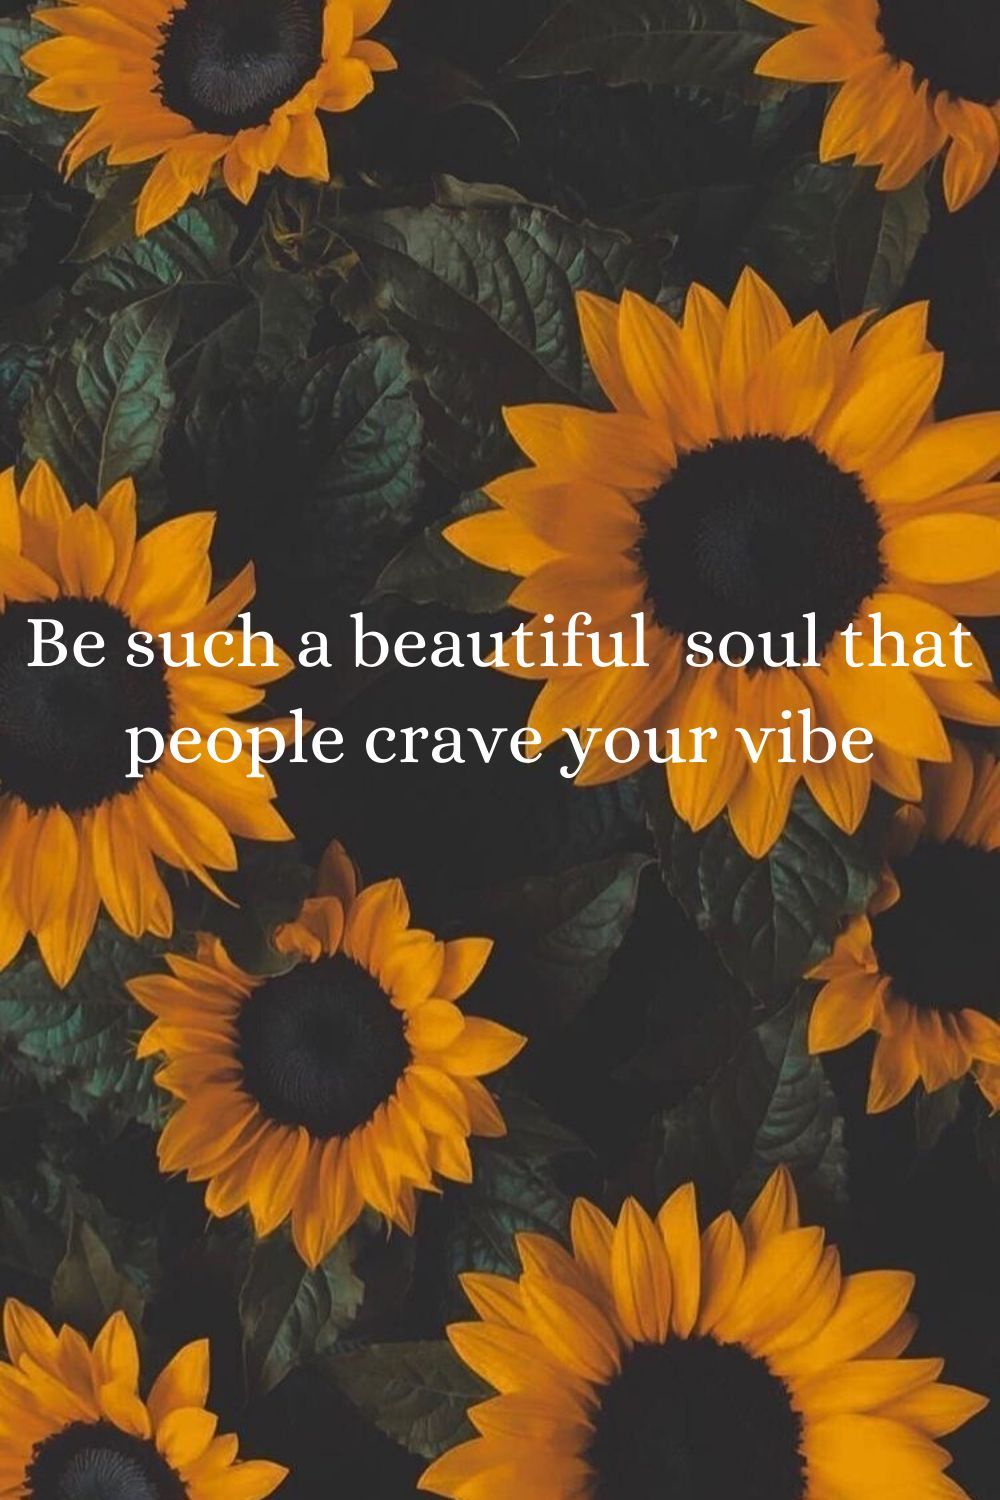 Beautiful soul. Sunflower quotes, Sunflower picture, Sunflower wallpaper